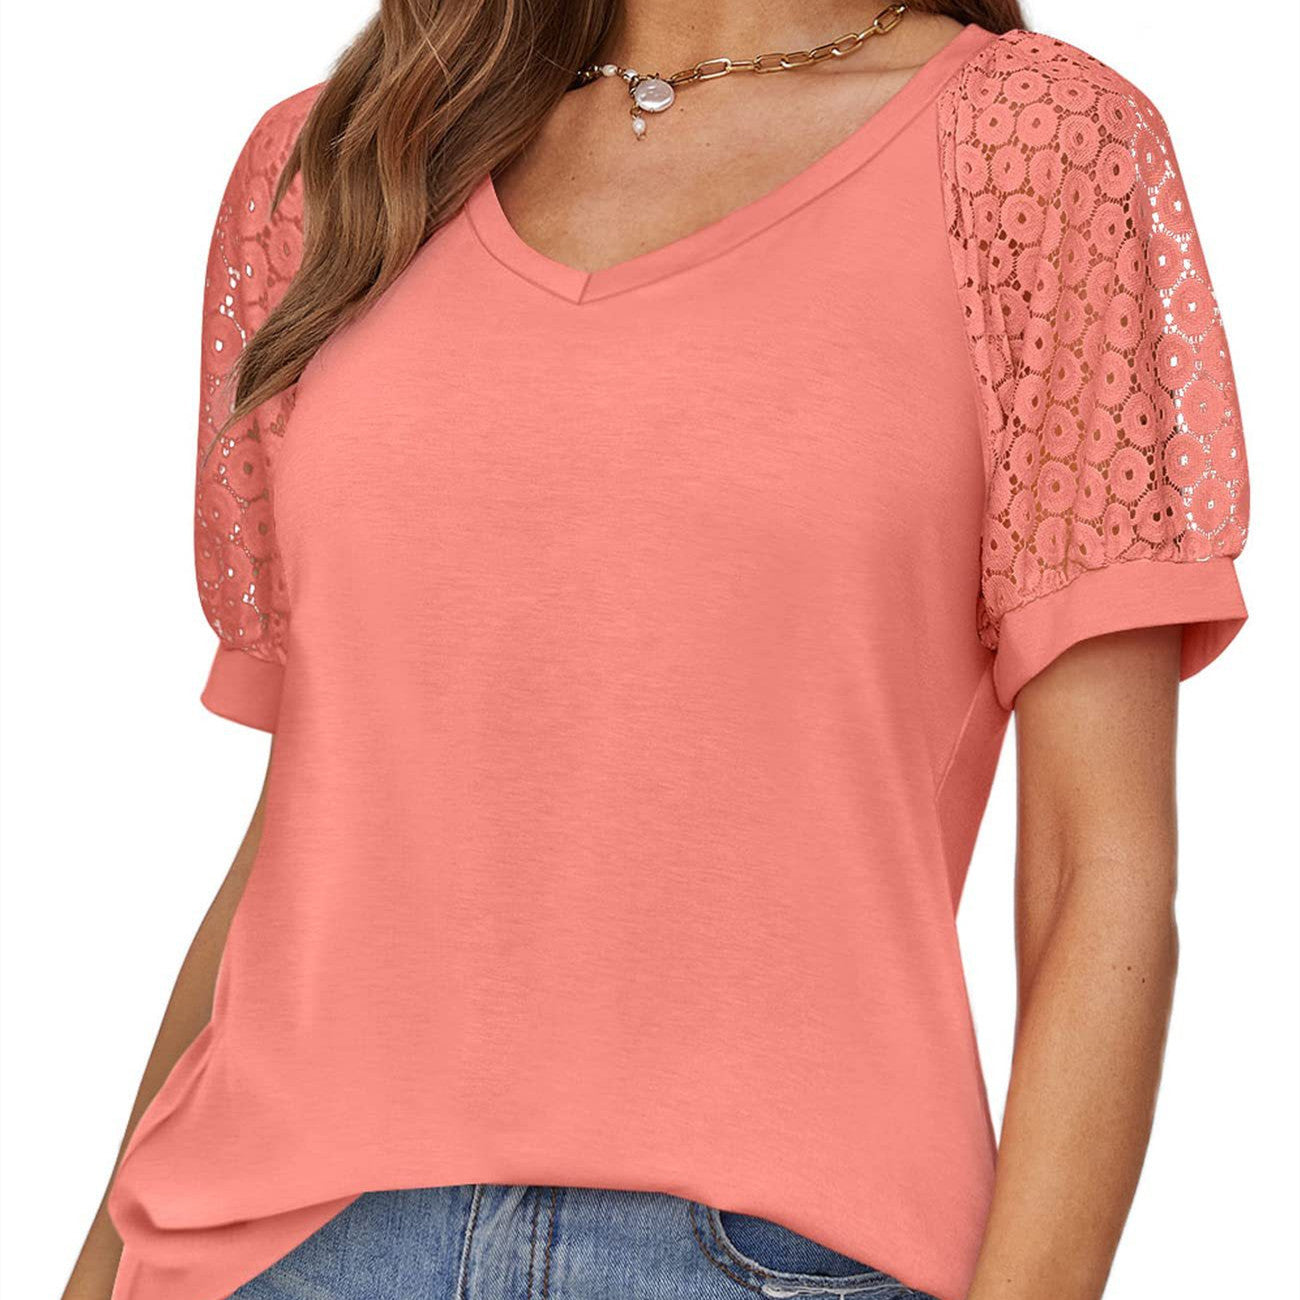 V-neck Lace Stitching Casual T-shirt For Women